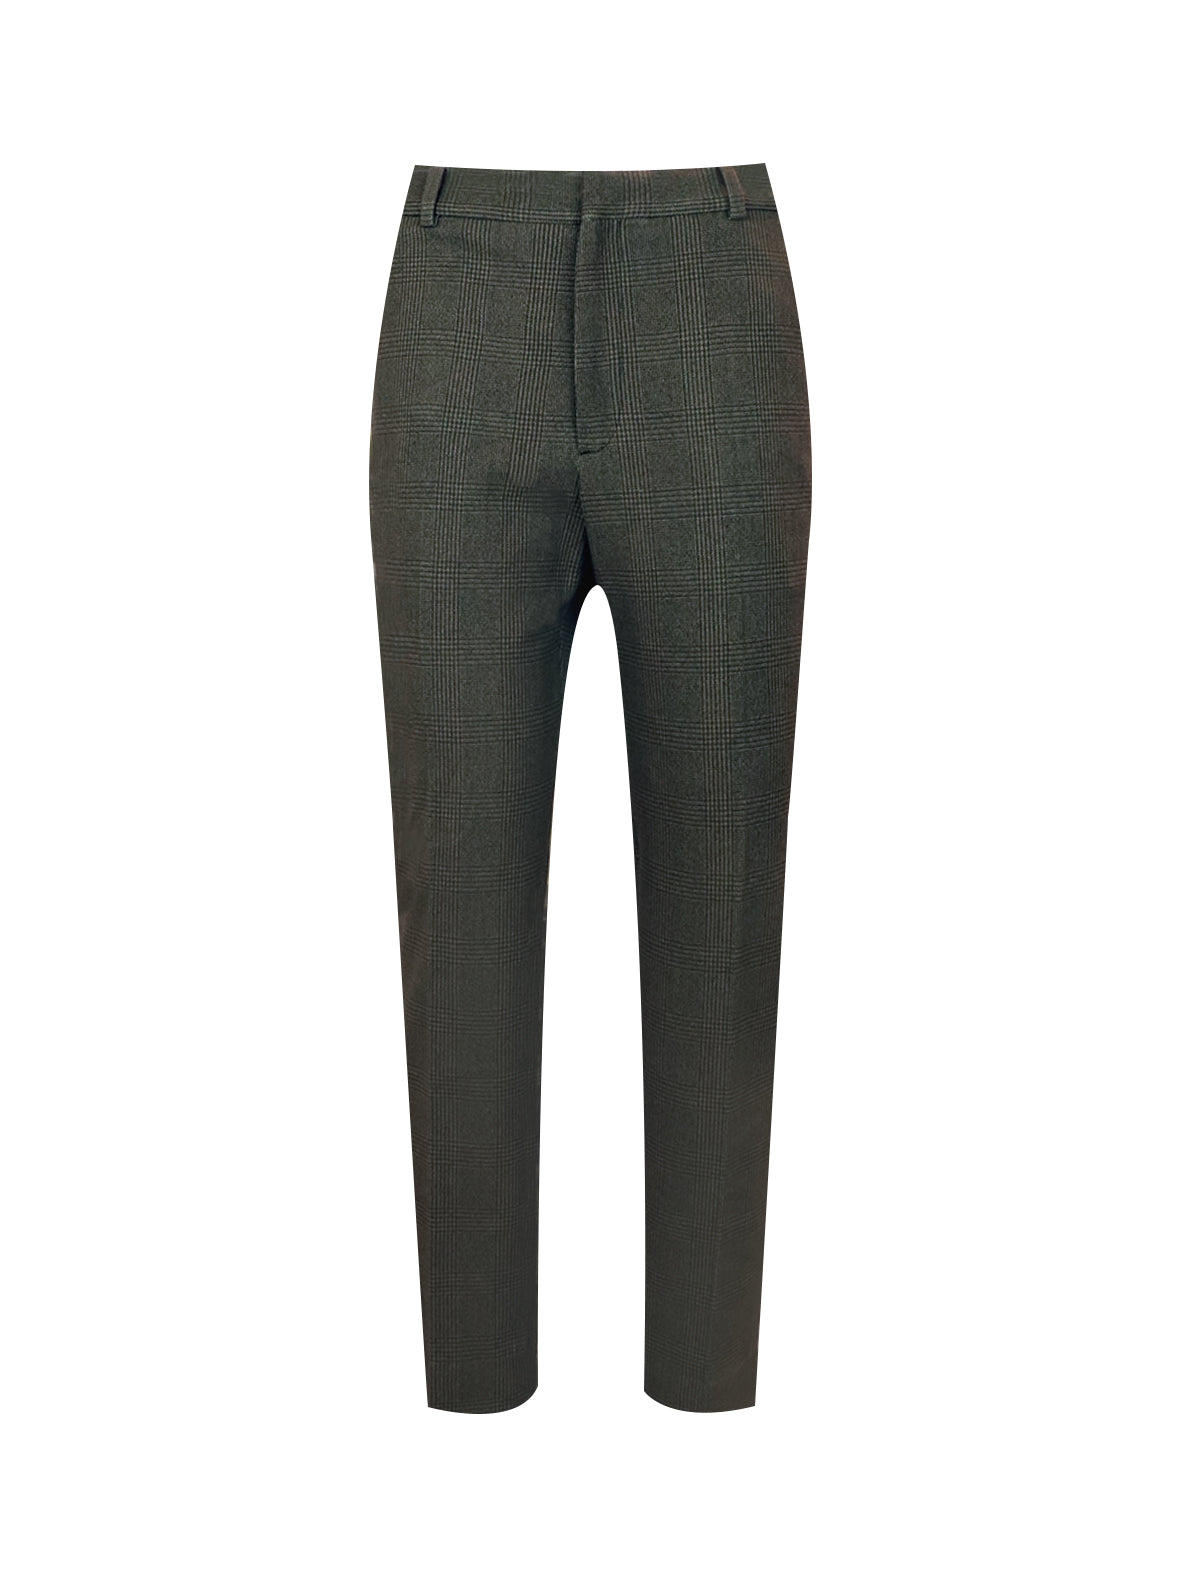 CIRCOLO 1901 Tailored Pants in Tabac